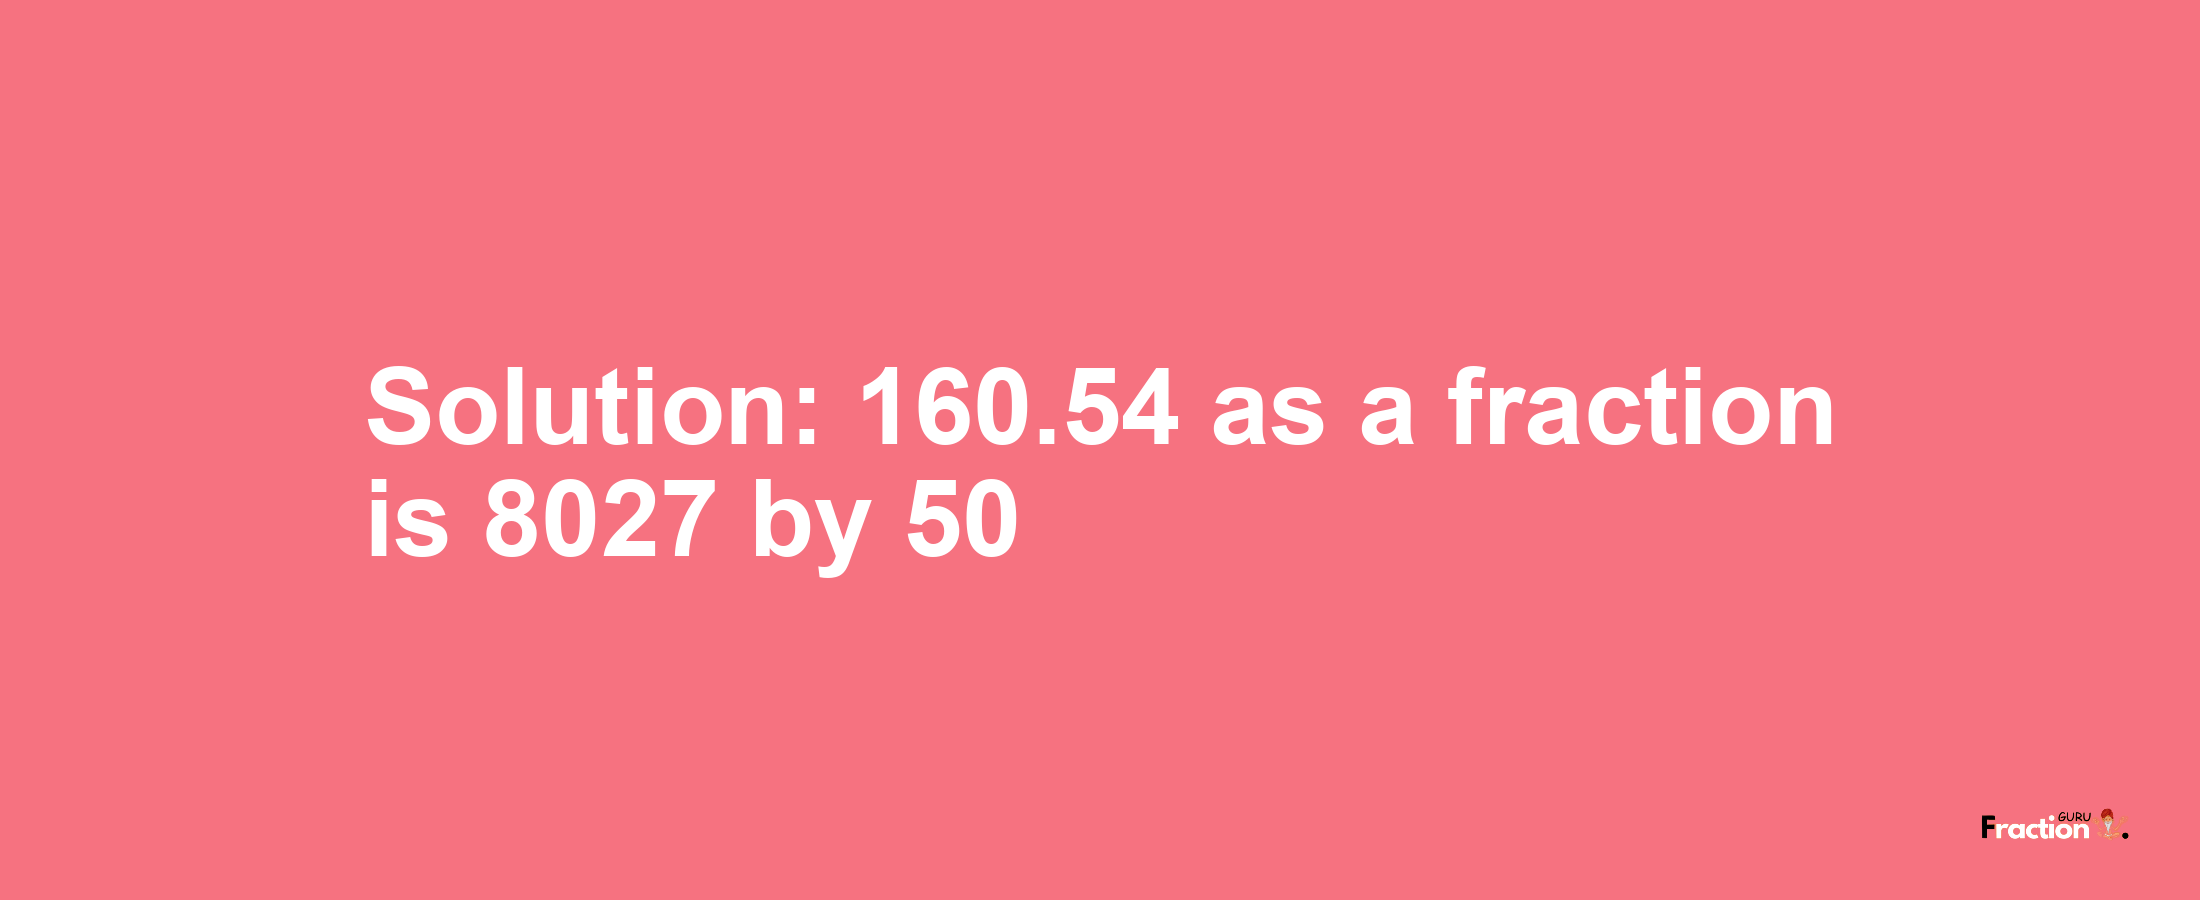 Solution:160.54 as a fraction is 8027/50